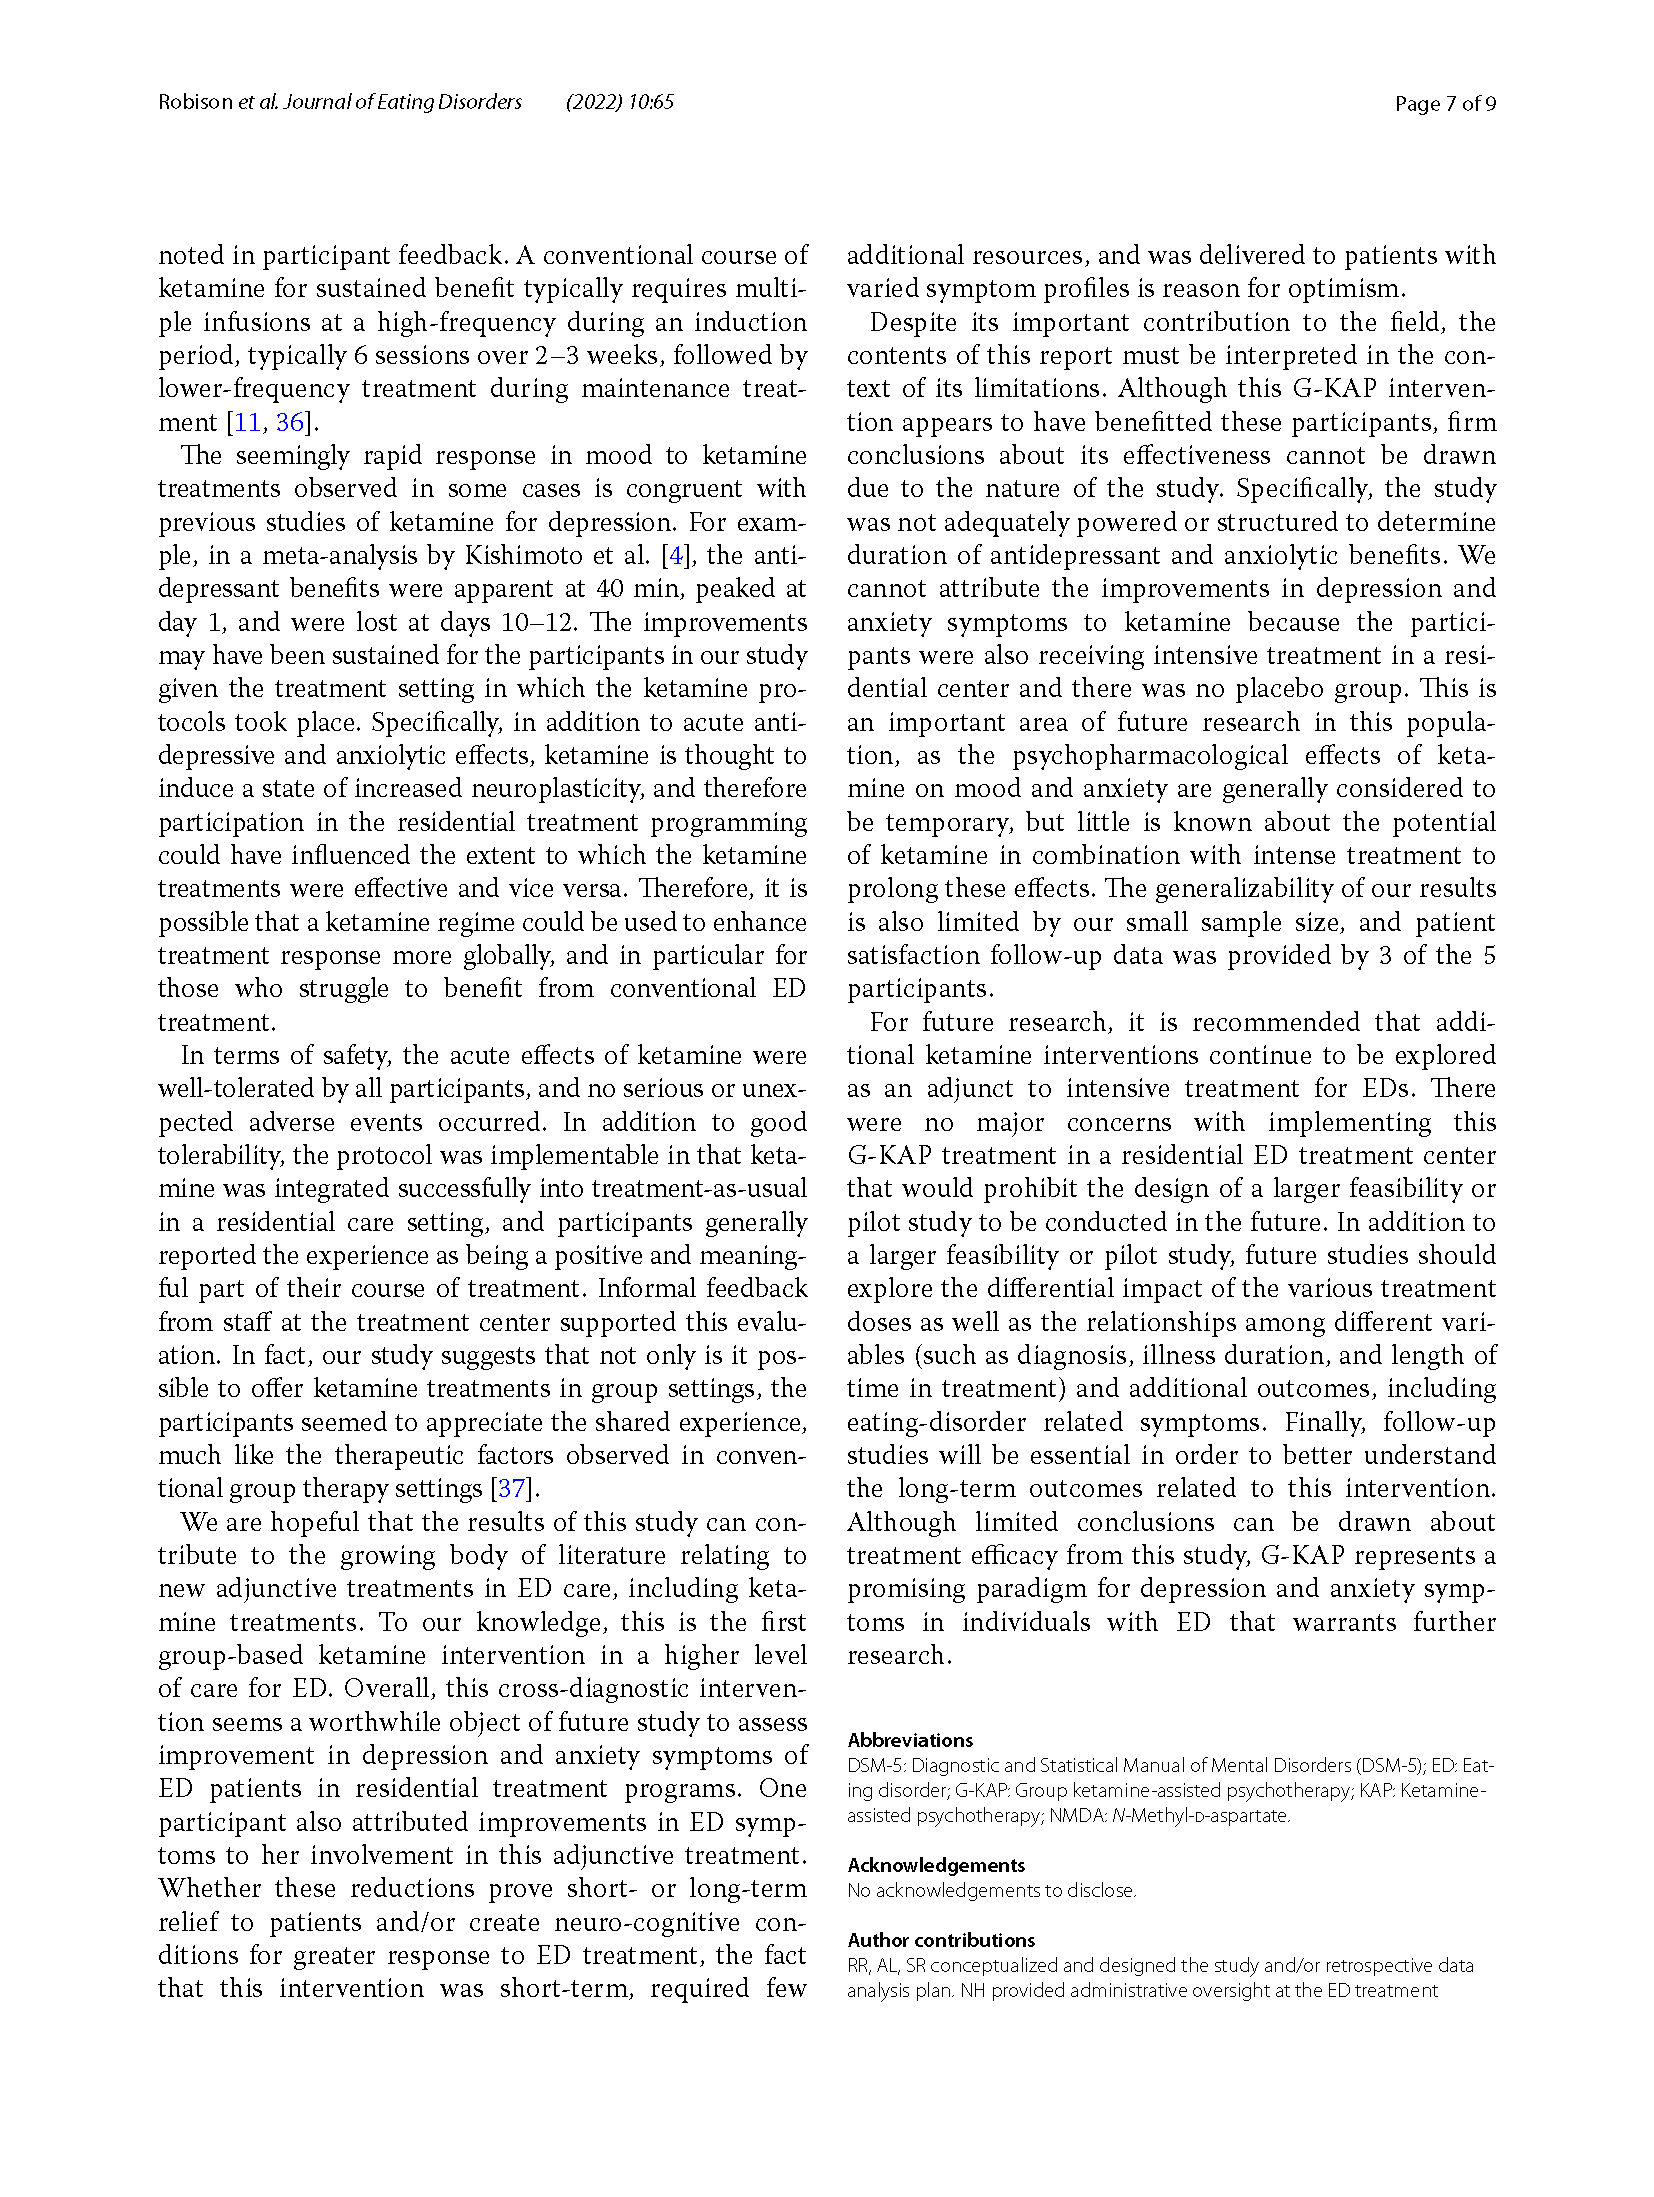 Group-based ketamine-assisted psychotherapy for patients in residential treatment for eating disorders with comorbid depression and anxiety disorders_Page_7.png